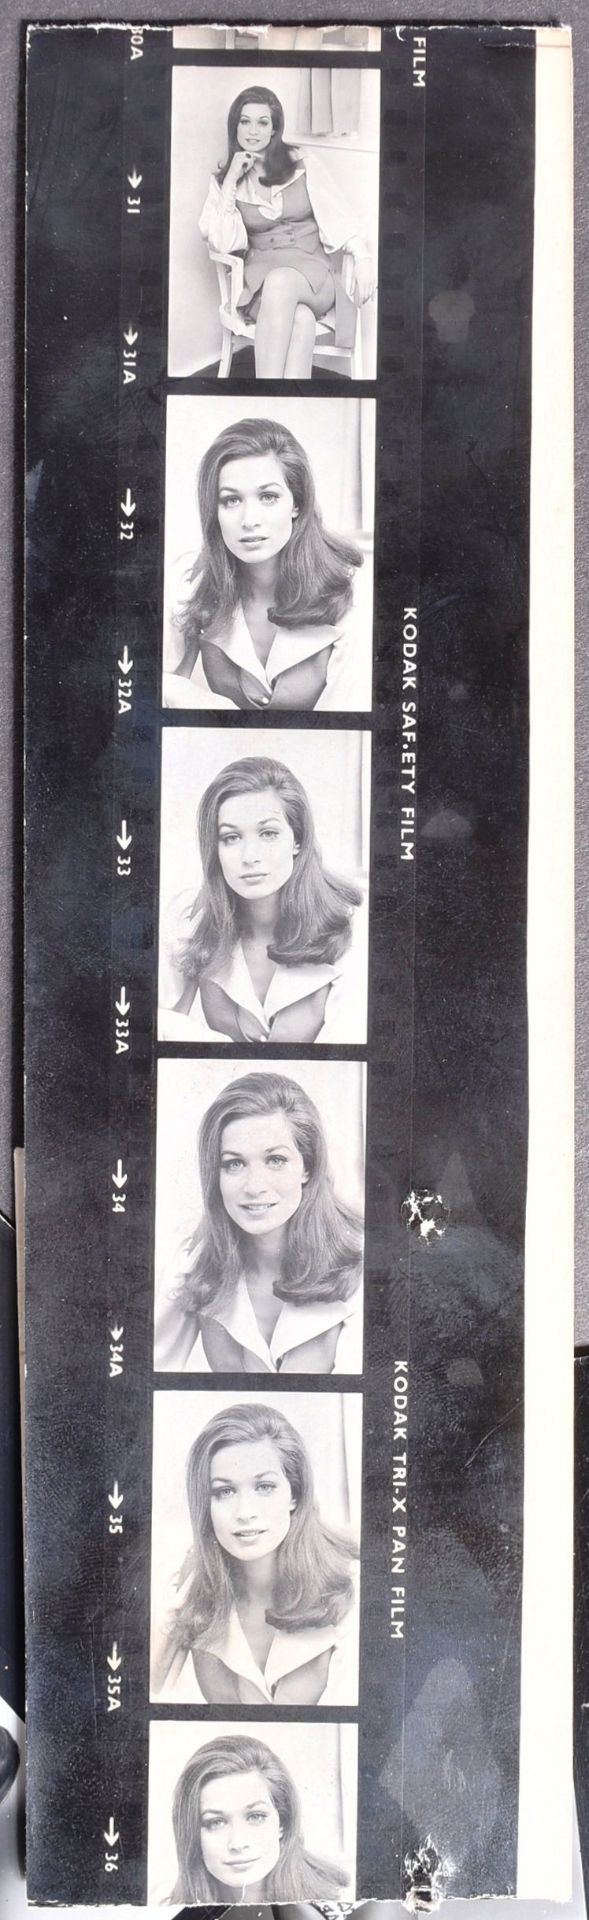 VALERIE LEON - COLLECTION OF VINTAGE 1960S / 70S CONTACT SHEETS - Image 2 of 5